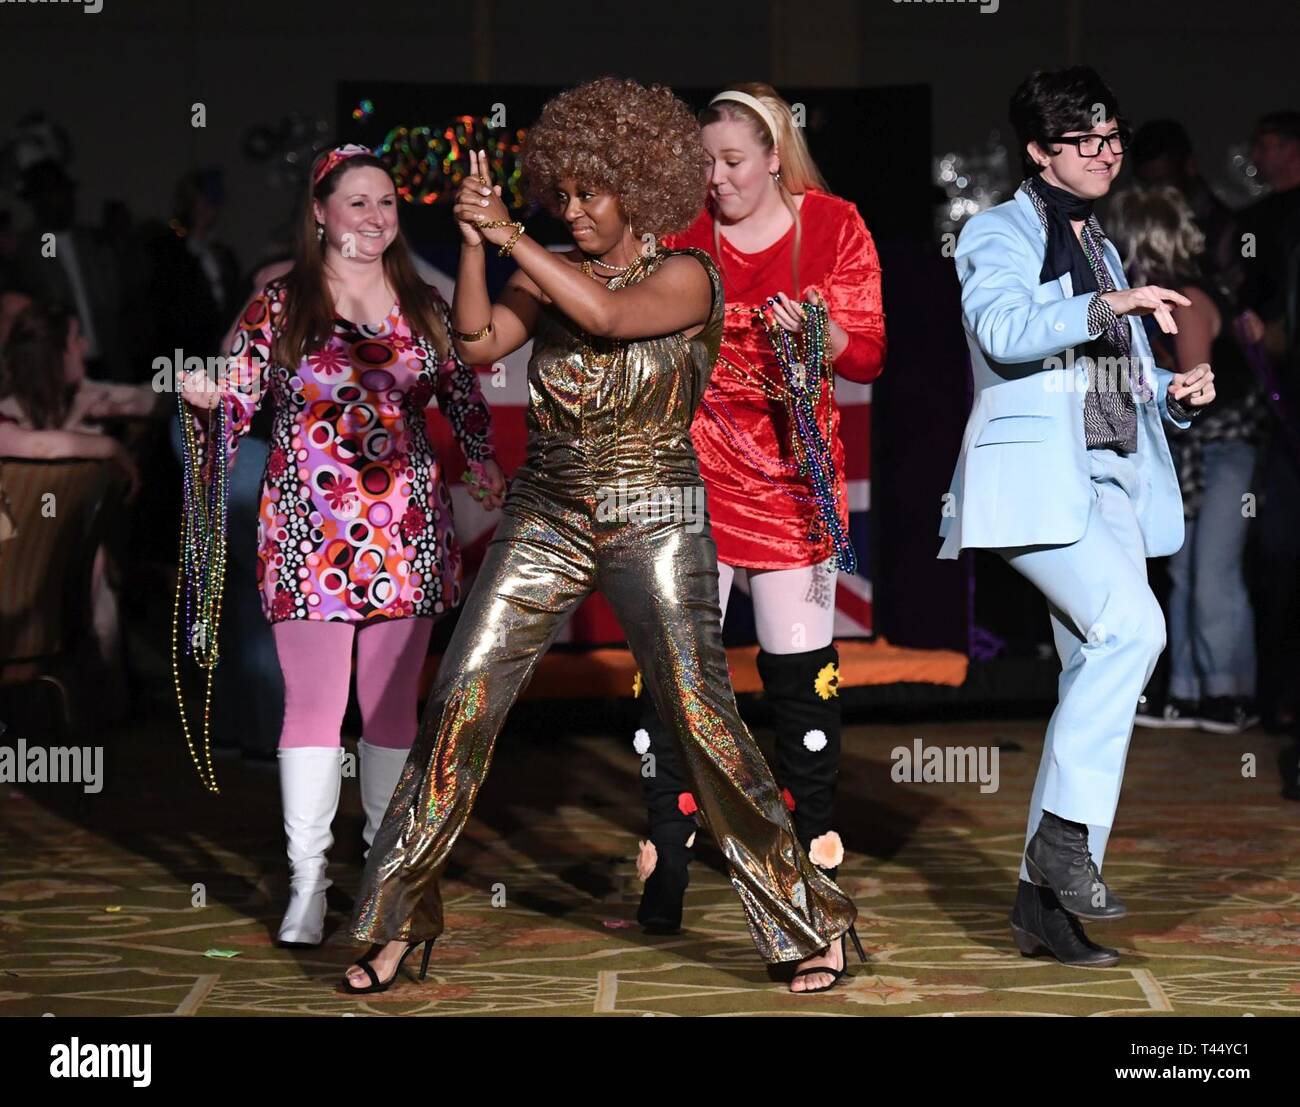 Members of the 81st Medical Operations Squadron portray the Austin Powers cast as they make their way down the aisle during the 31st Annual Krewe of Medics Mardi Gras Ball at the Bay Breeze Event Center on Keesler Air Force Base, Mississippi, Feb. 23, 2019. The Krewe of Medics hosts a yearly ball to give Keesler Medical Center personnel a taste of the Gulf Coast and an opportunity to experience a traditional Mardi Gras, which is celebrated by the local communities. The theme for this year's ball was Hollywood vs. Broadway. Stock Photo